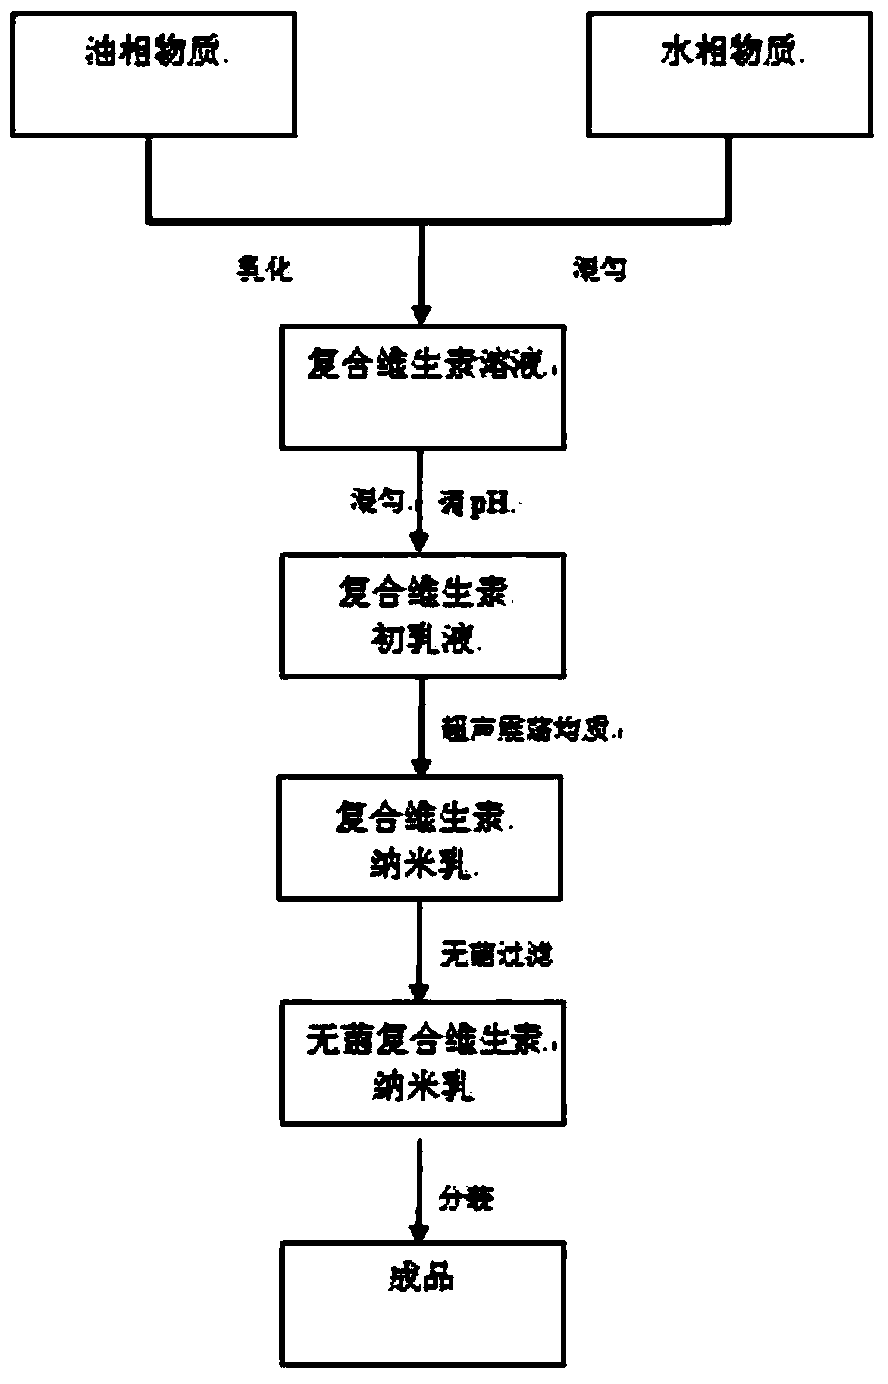 Process for manufacturing decavitamin nanoemulsion for livestock and poultry